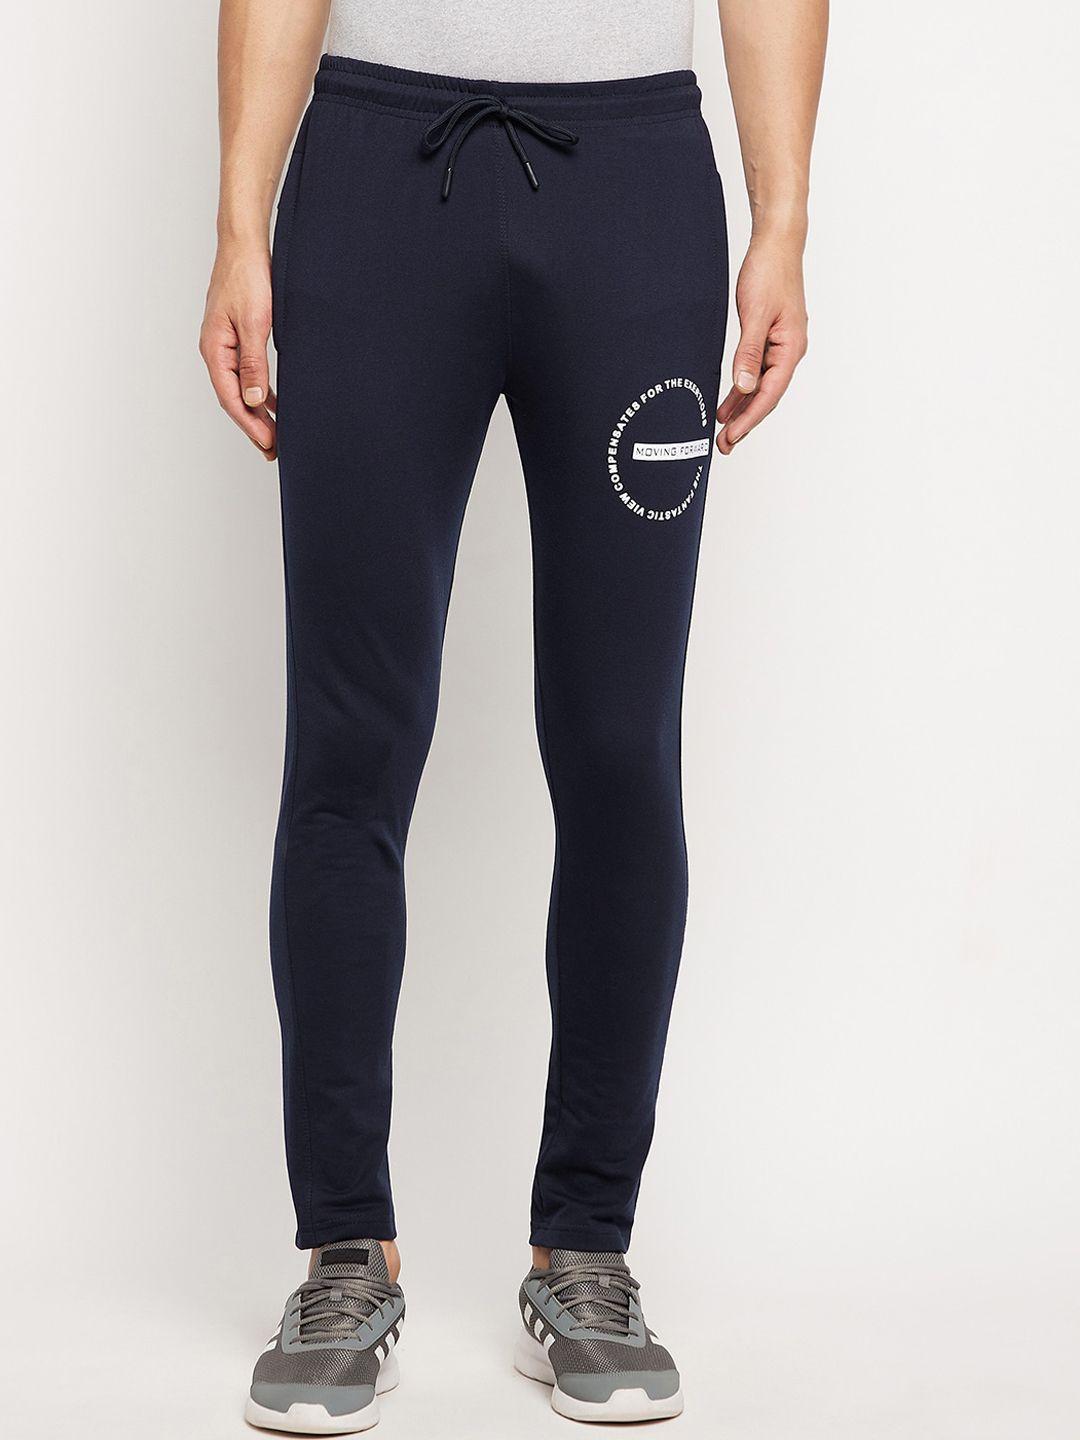 firstkrush navy blue solid cotton track pants